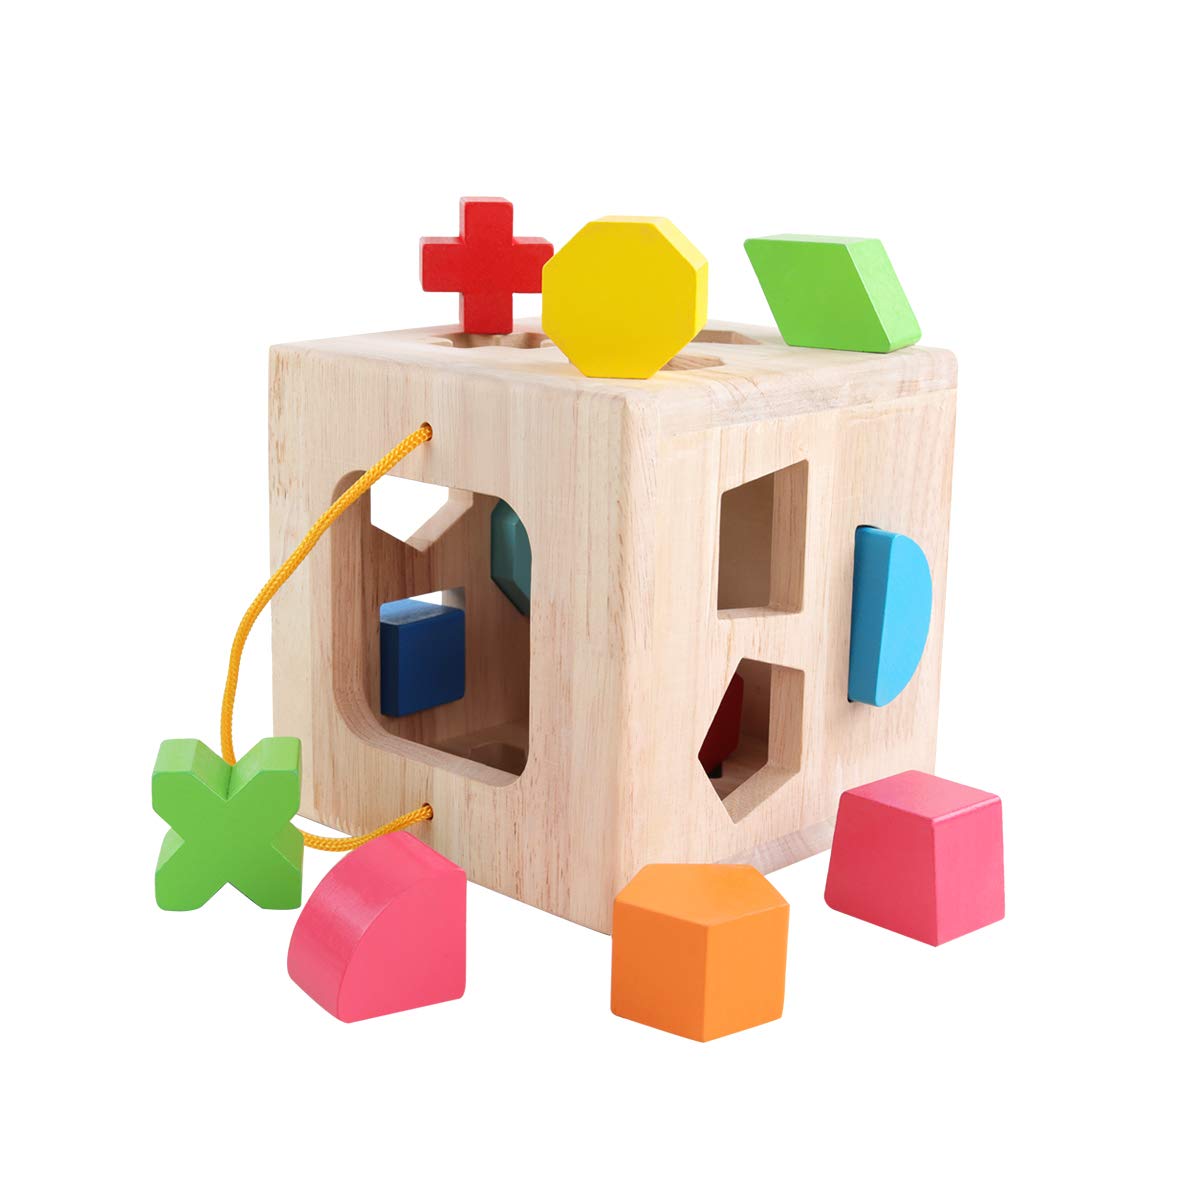 GEMEM Shape Sorter Toy My First Wooden 12 Building Blocks Geometry Learning Matching Sorting Gifts Didactic Classic Toys for Toddlers Baby Kids 2 3 Years Old